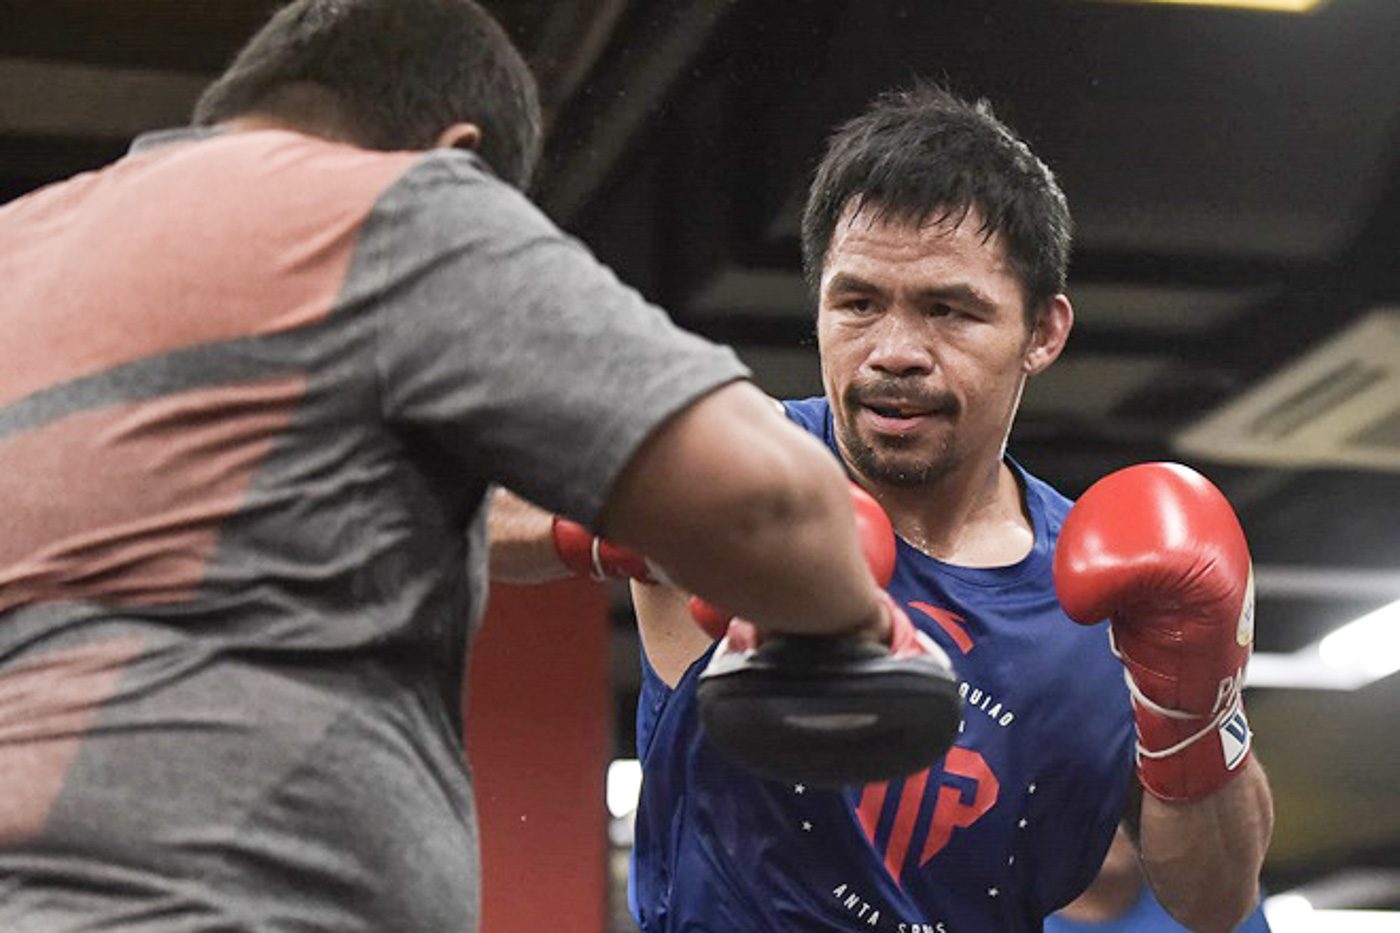 Pacquiao trains hours before boarding plane